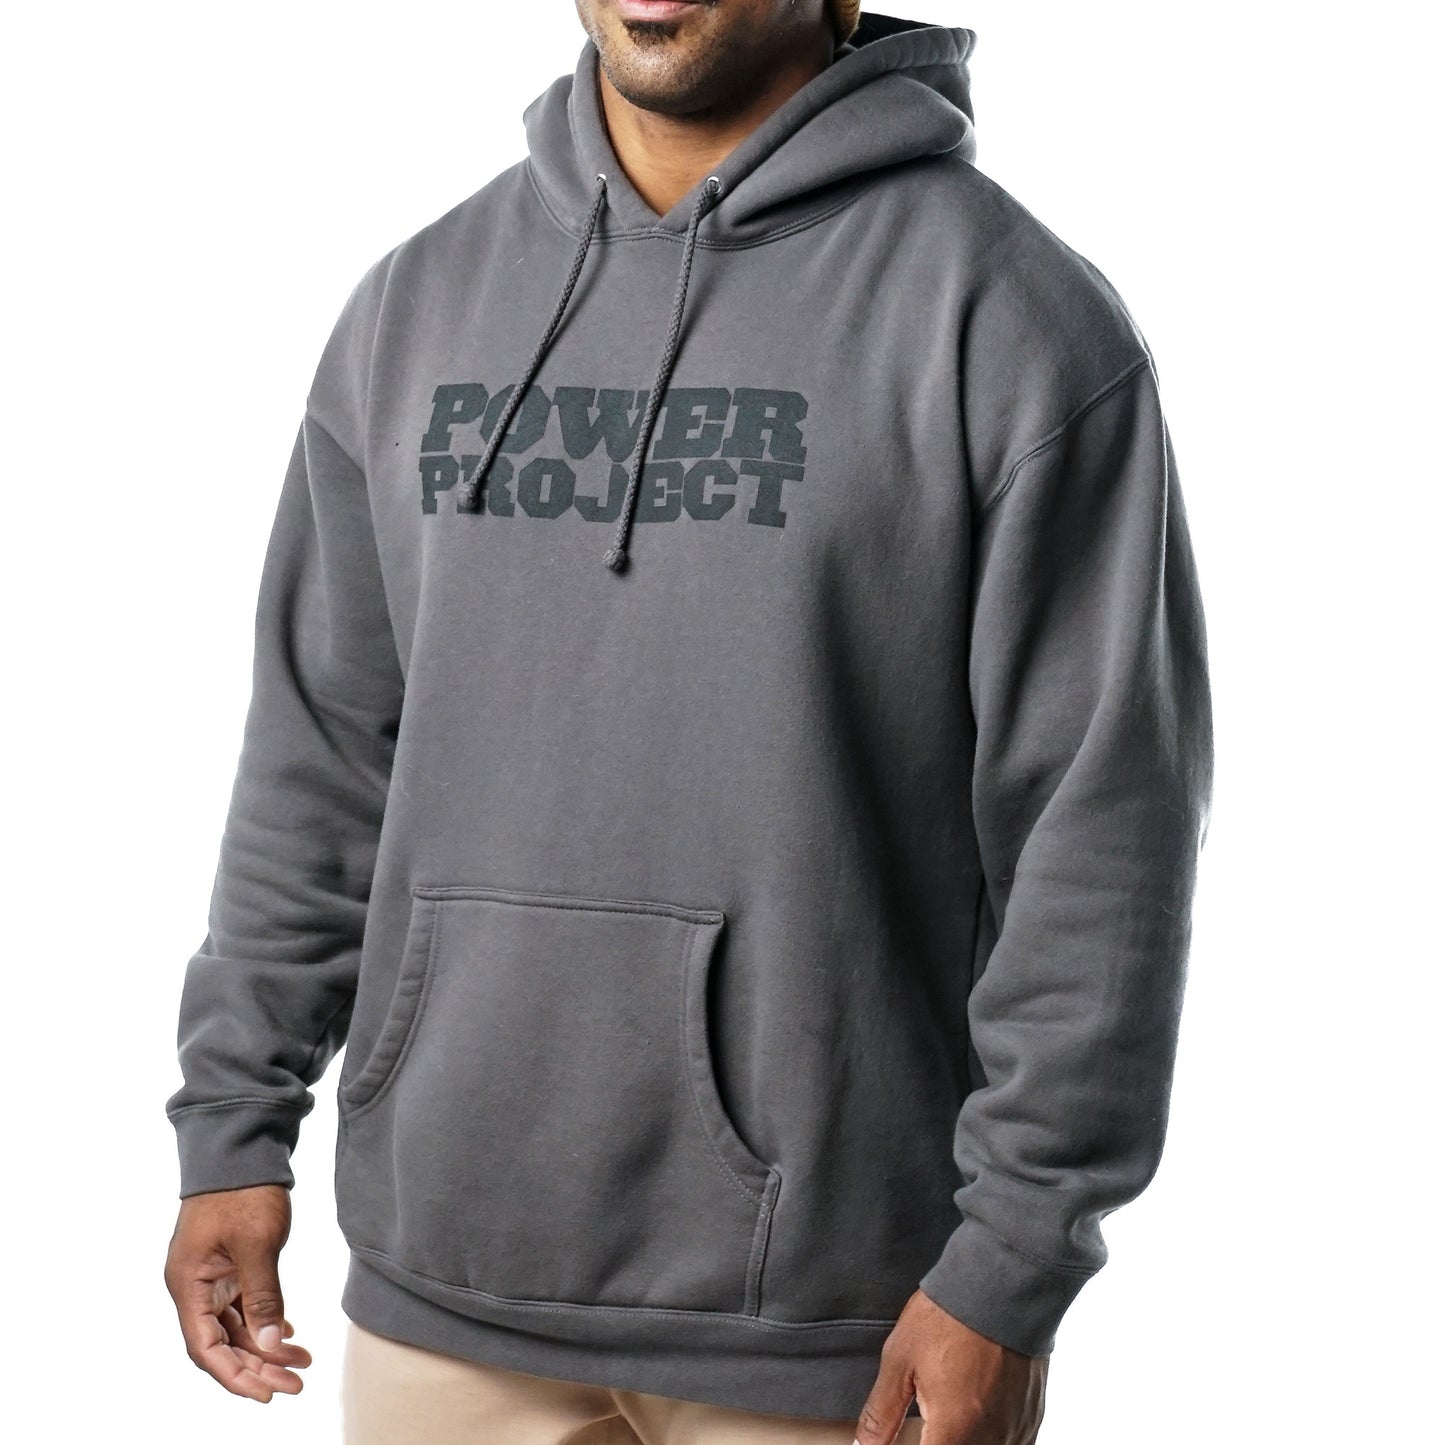 Power Project Hoodie (Charcoal)